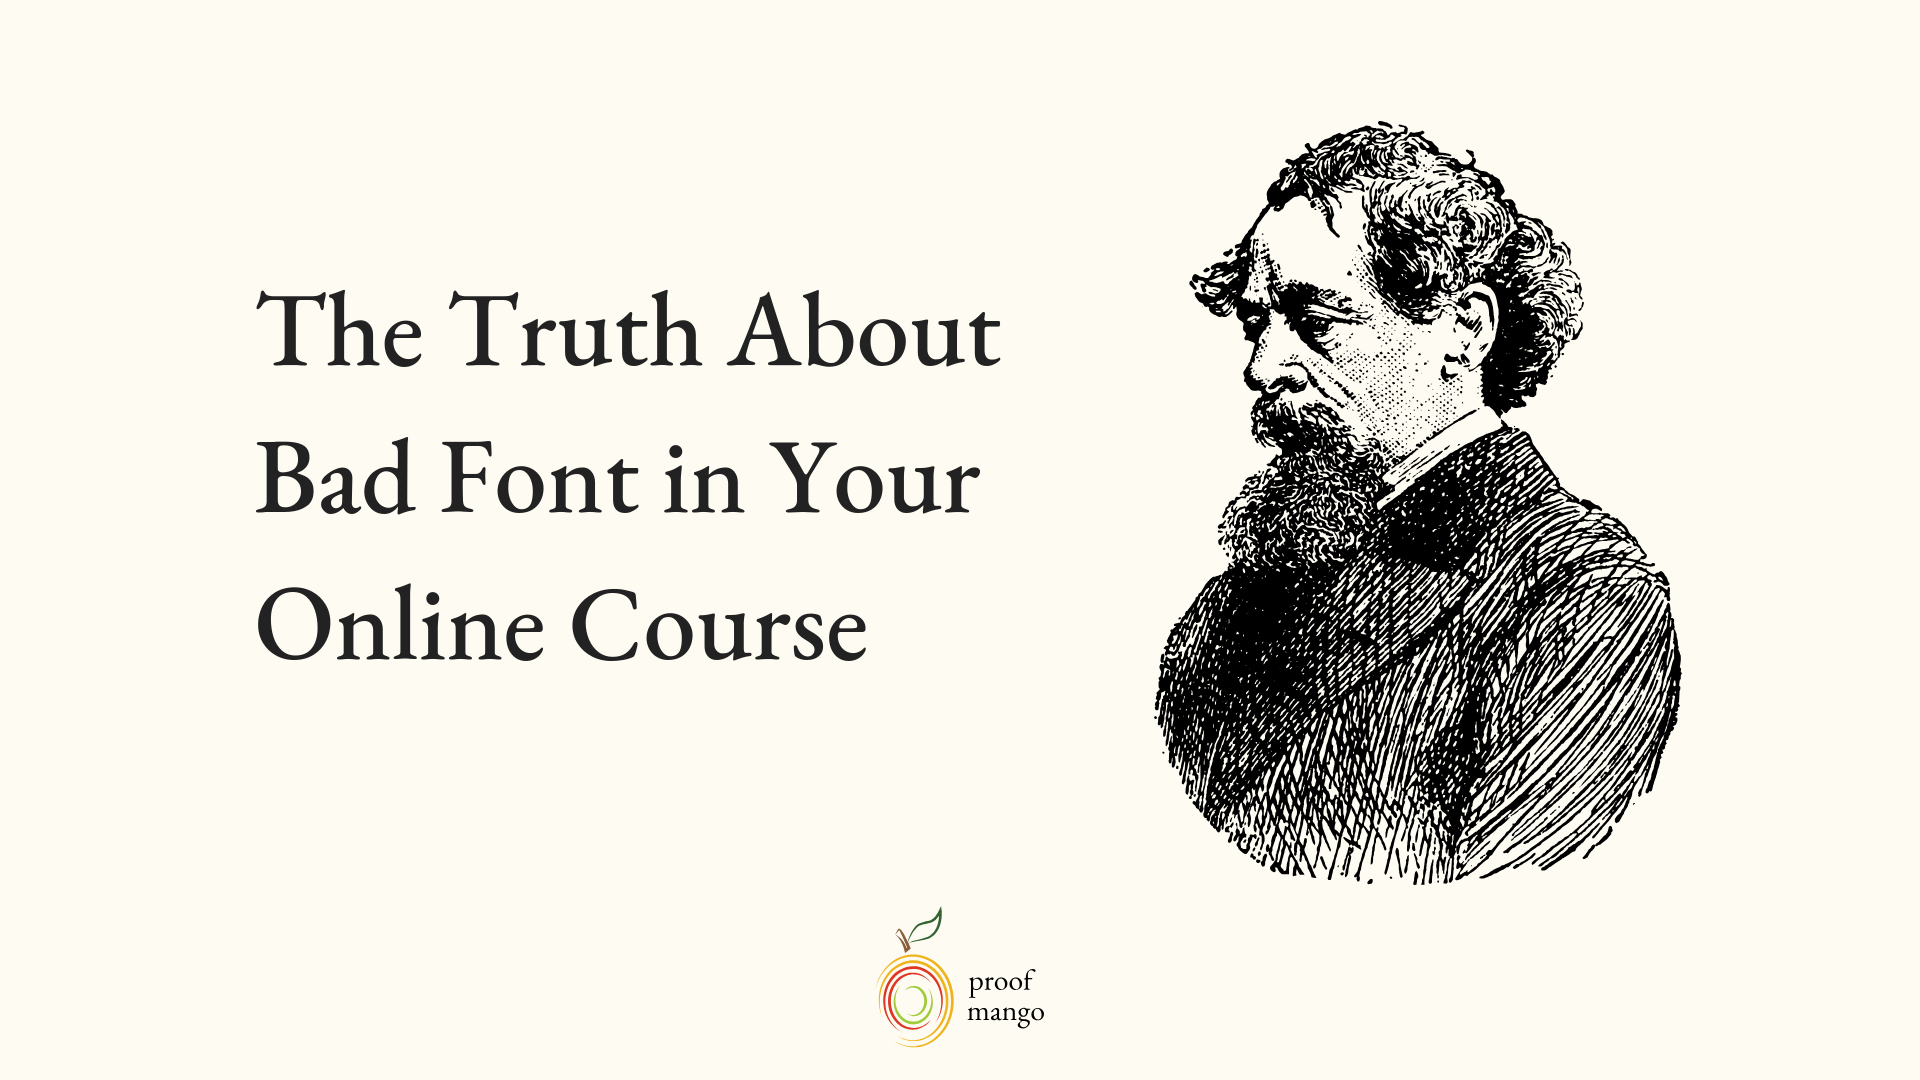 The Truth About Bad Font in Your Online Course